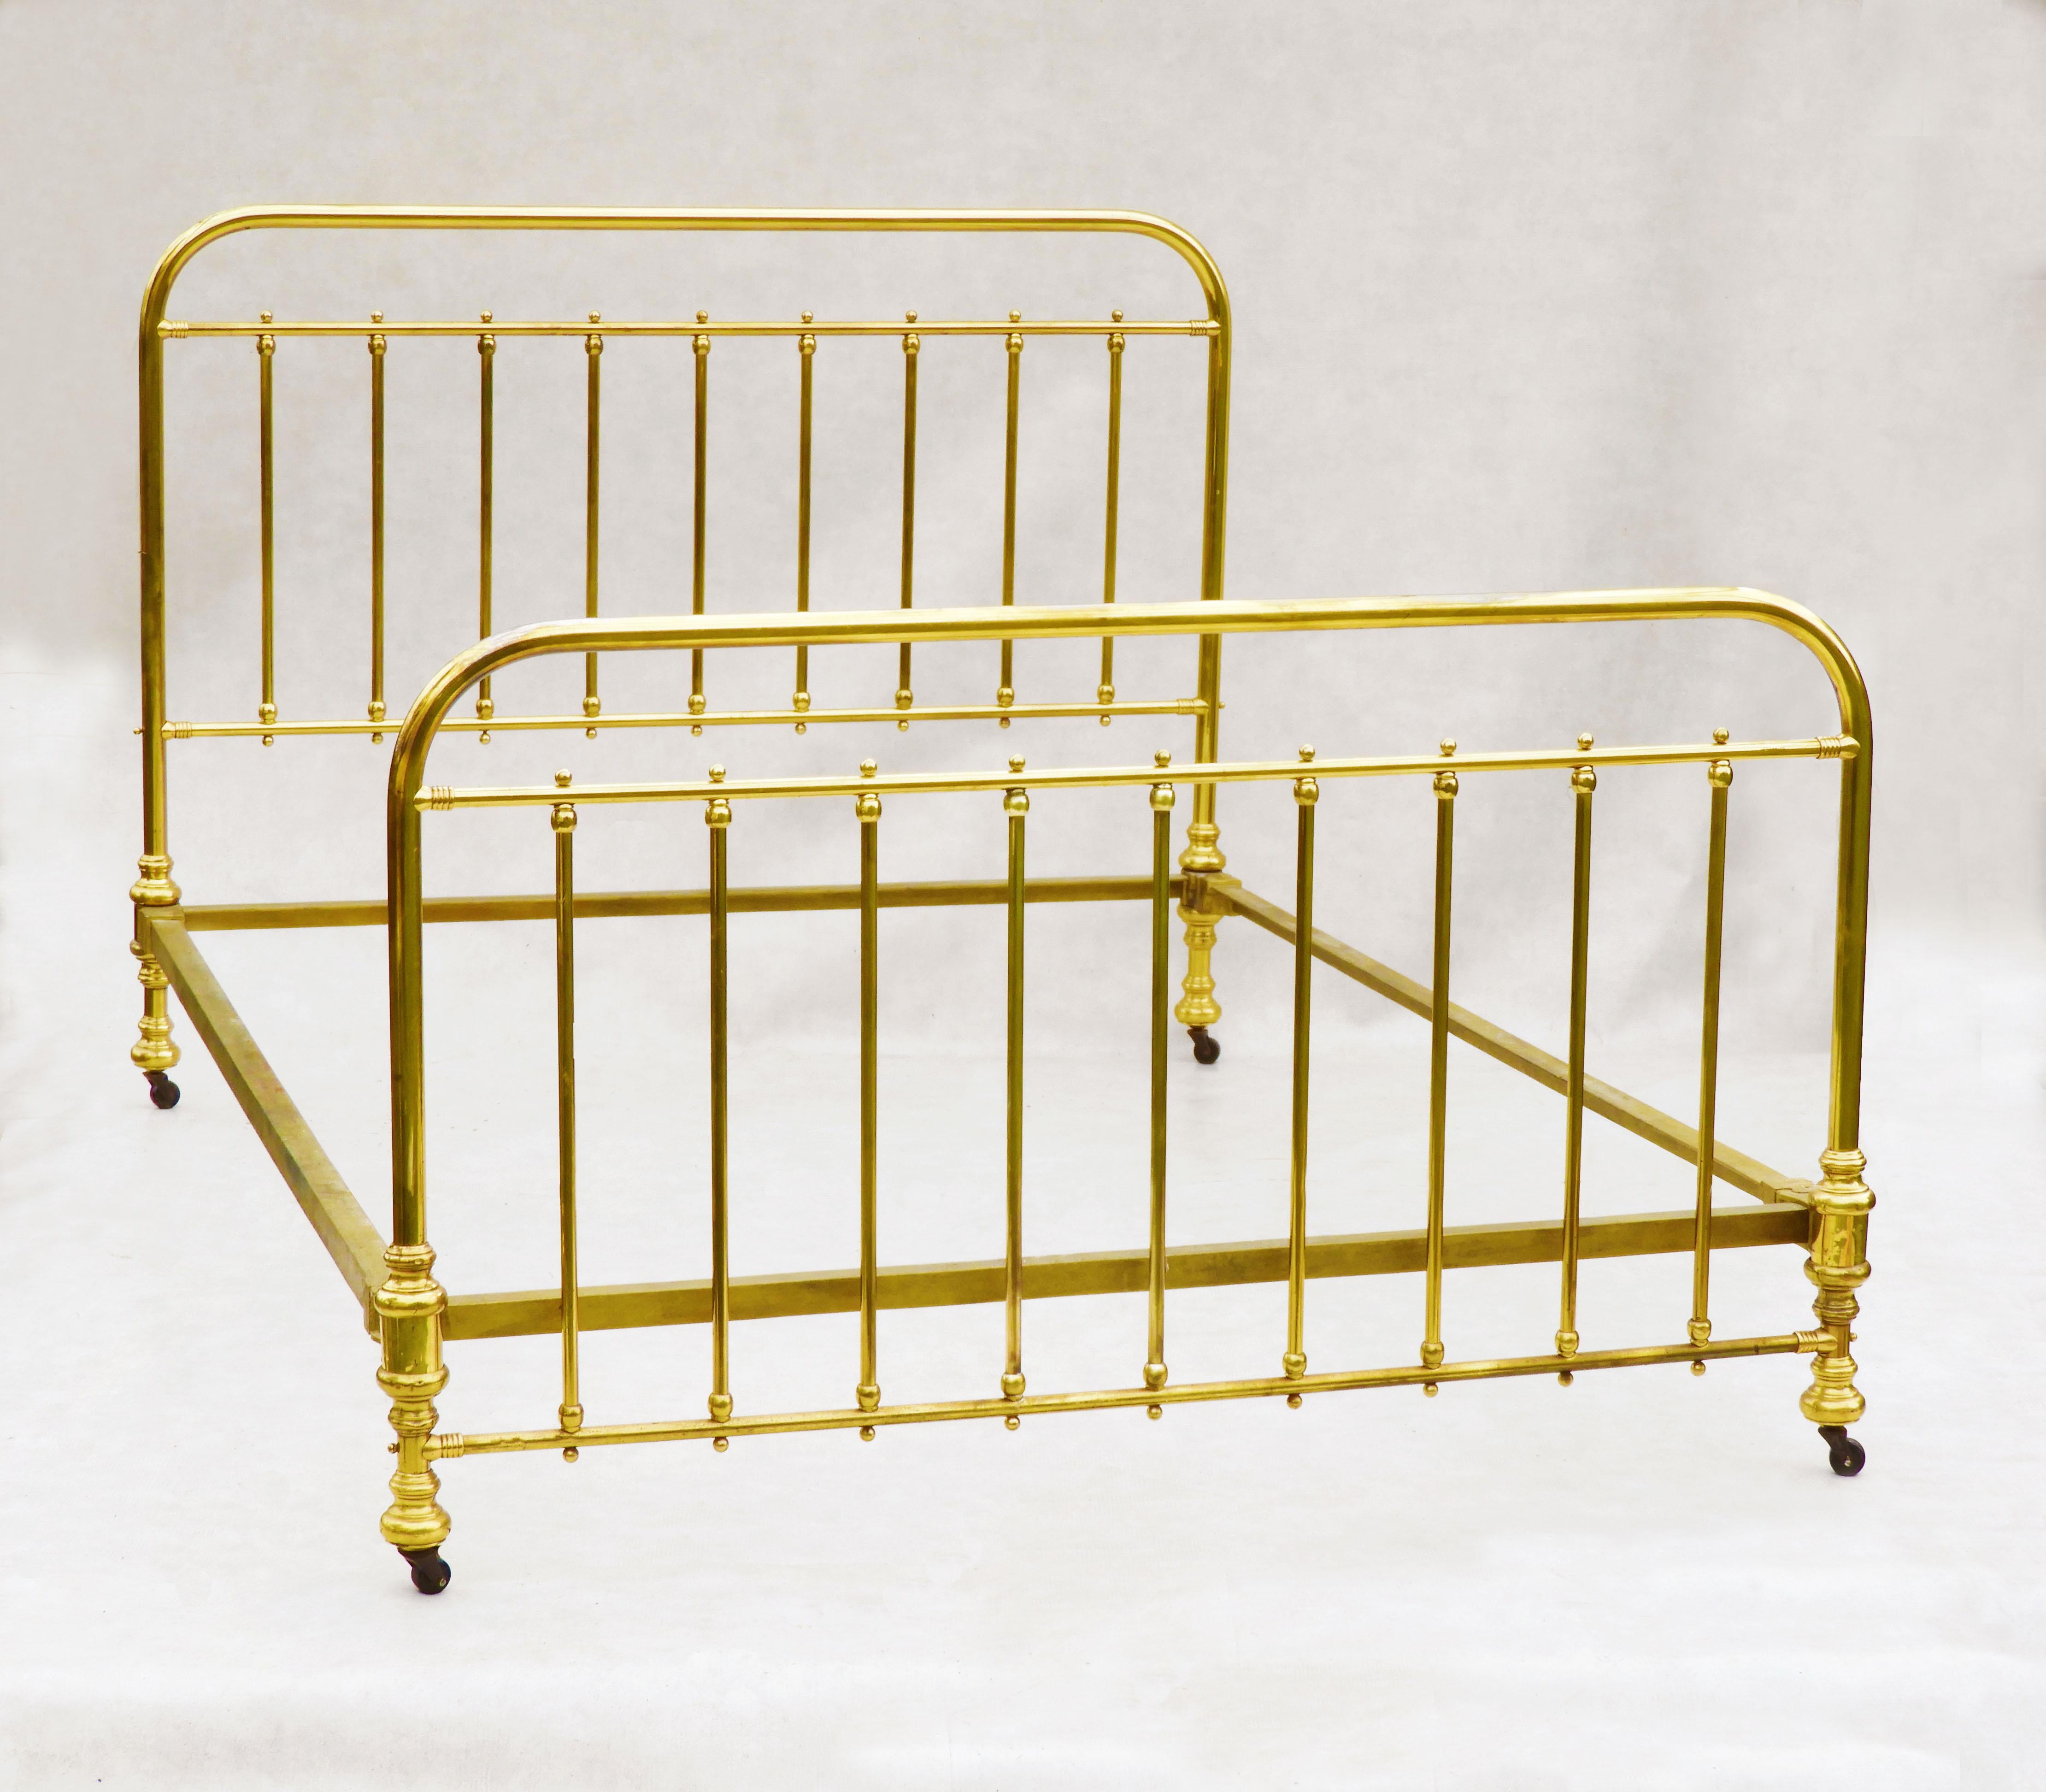 Stylish and unusual French antique brass bed.  Rectangular in form but with smooth rounded corners, tubular rails and ball finials. A good quality well-made bed. In good condition, sturdy and strong with good colour and nice patina, clean but not